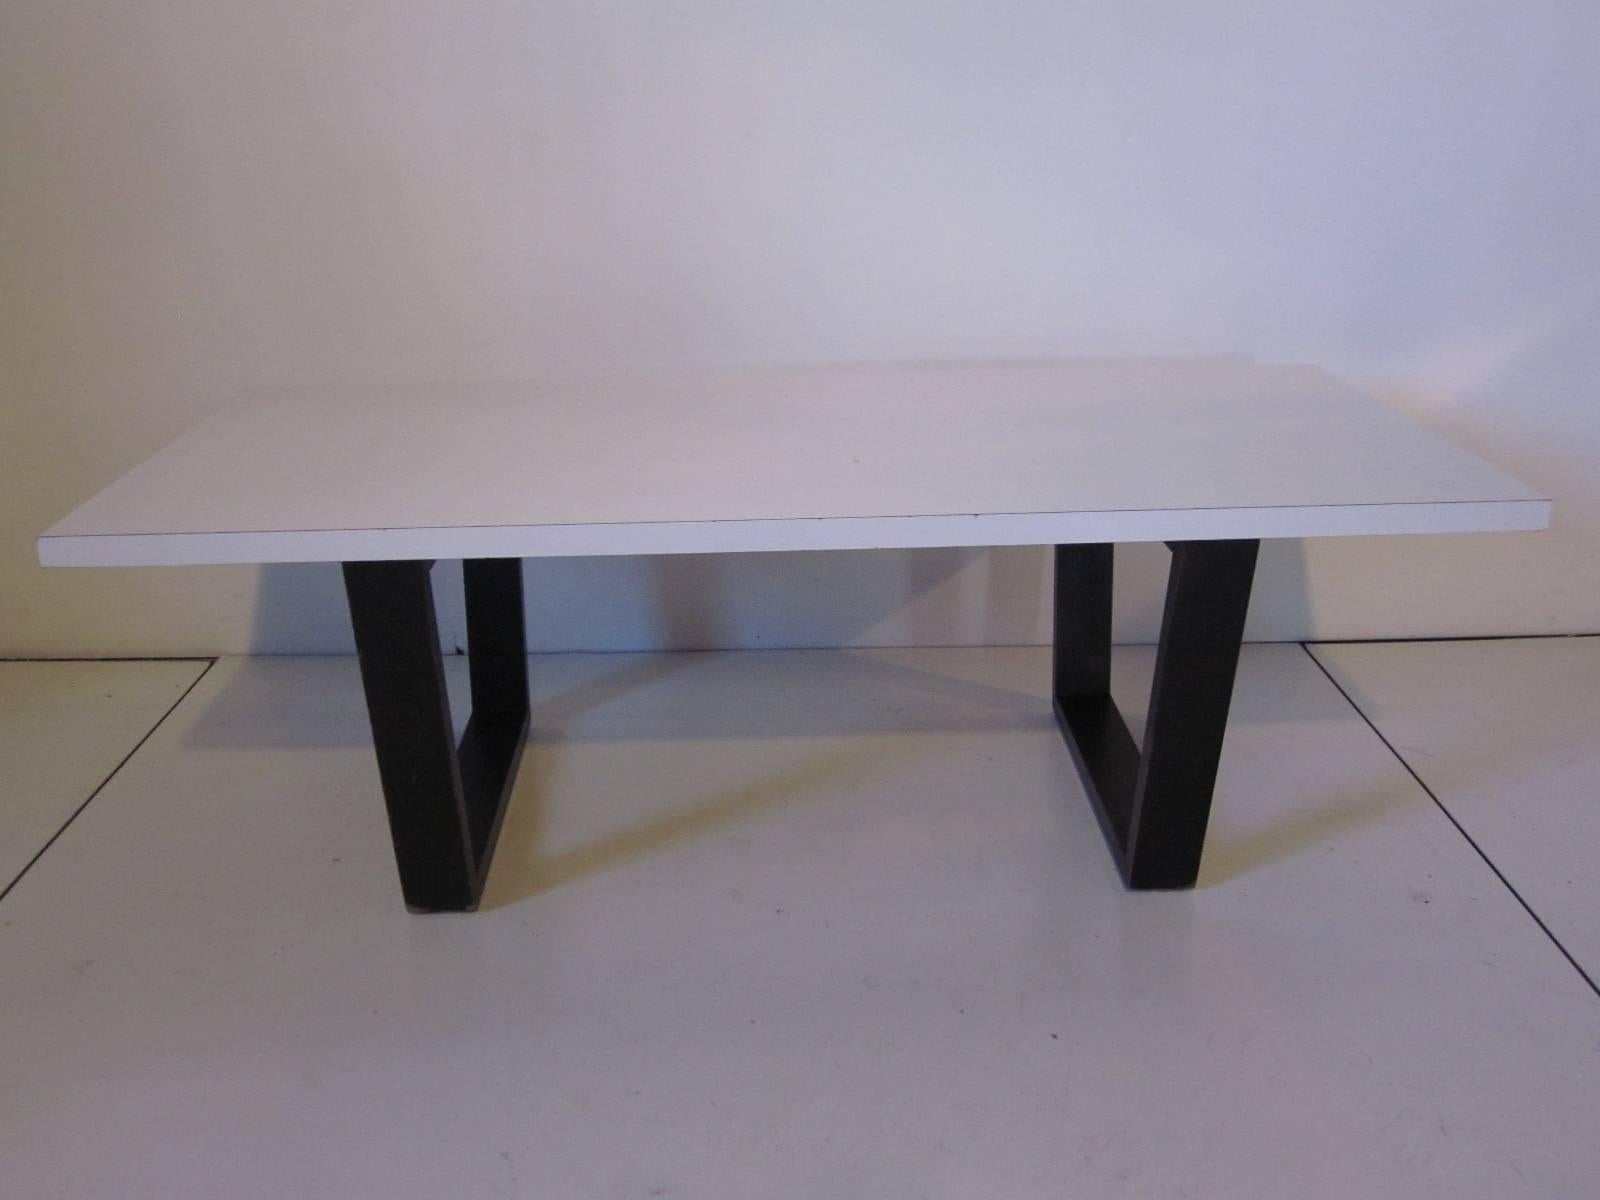 A rare George Nelson designed prototype coffee table or bench with black satin slat bench styled wood legs and white laminate top, the top is typical of the size, thickness and make up of other Herman Miller designs from the period. Purchased from